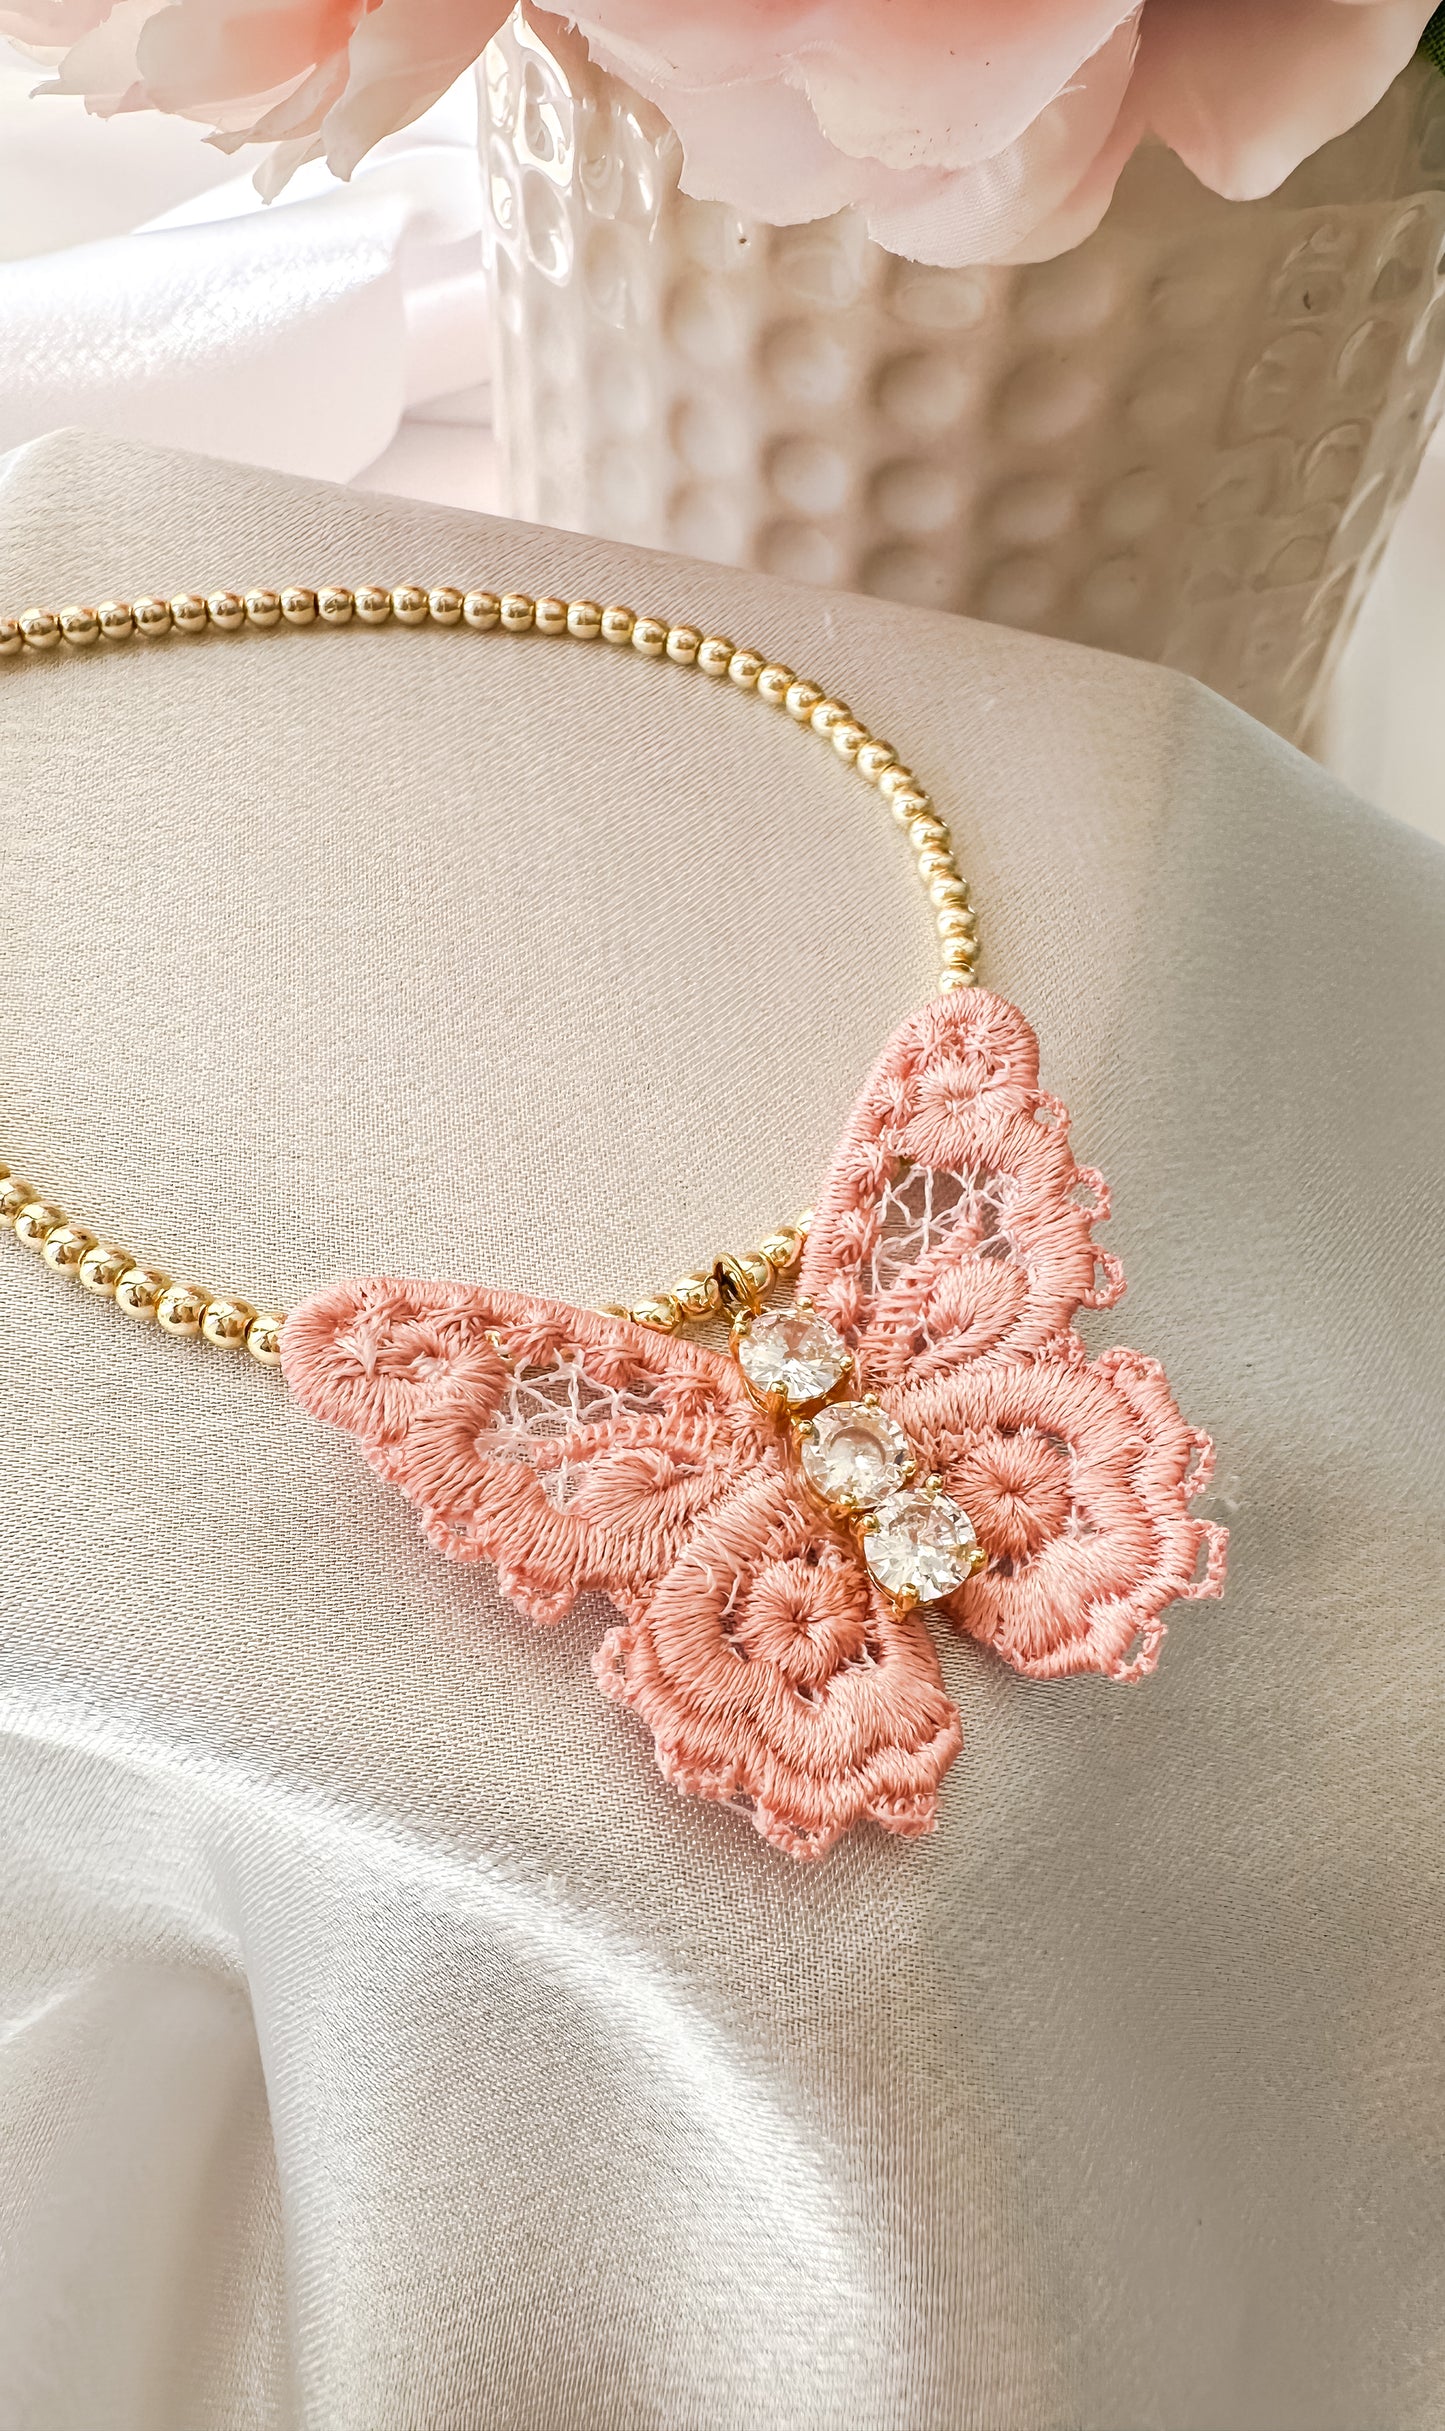 Annabella Butterfly Necklace